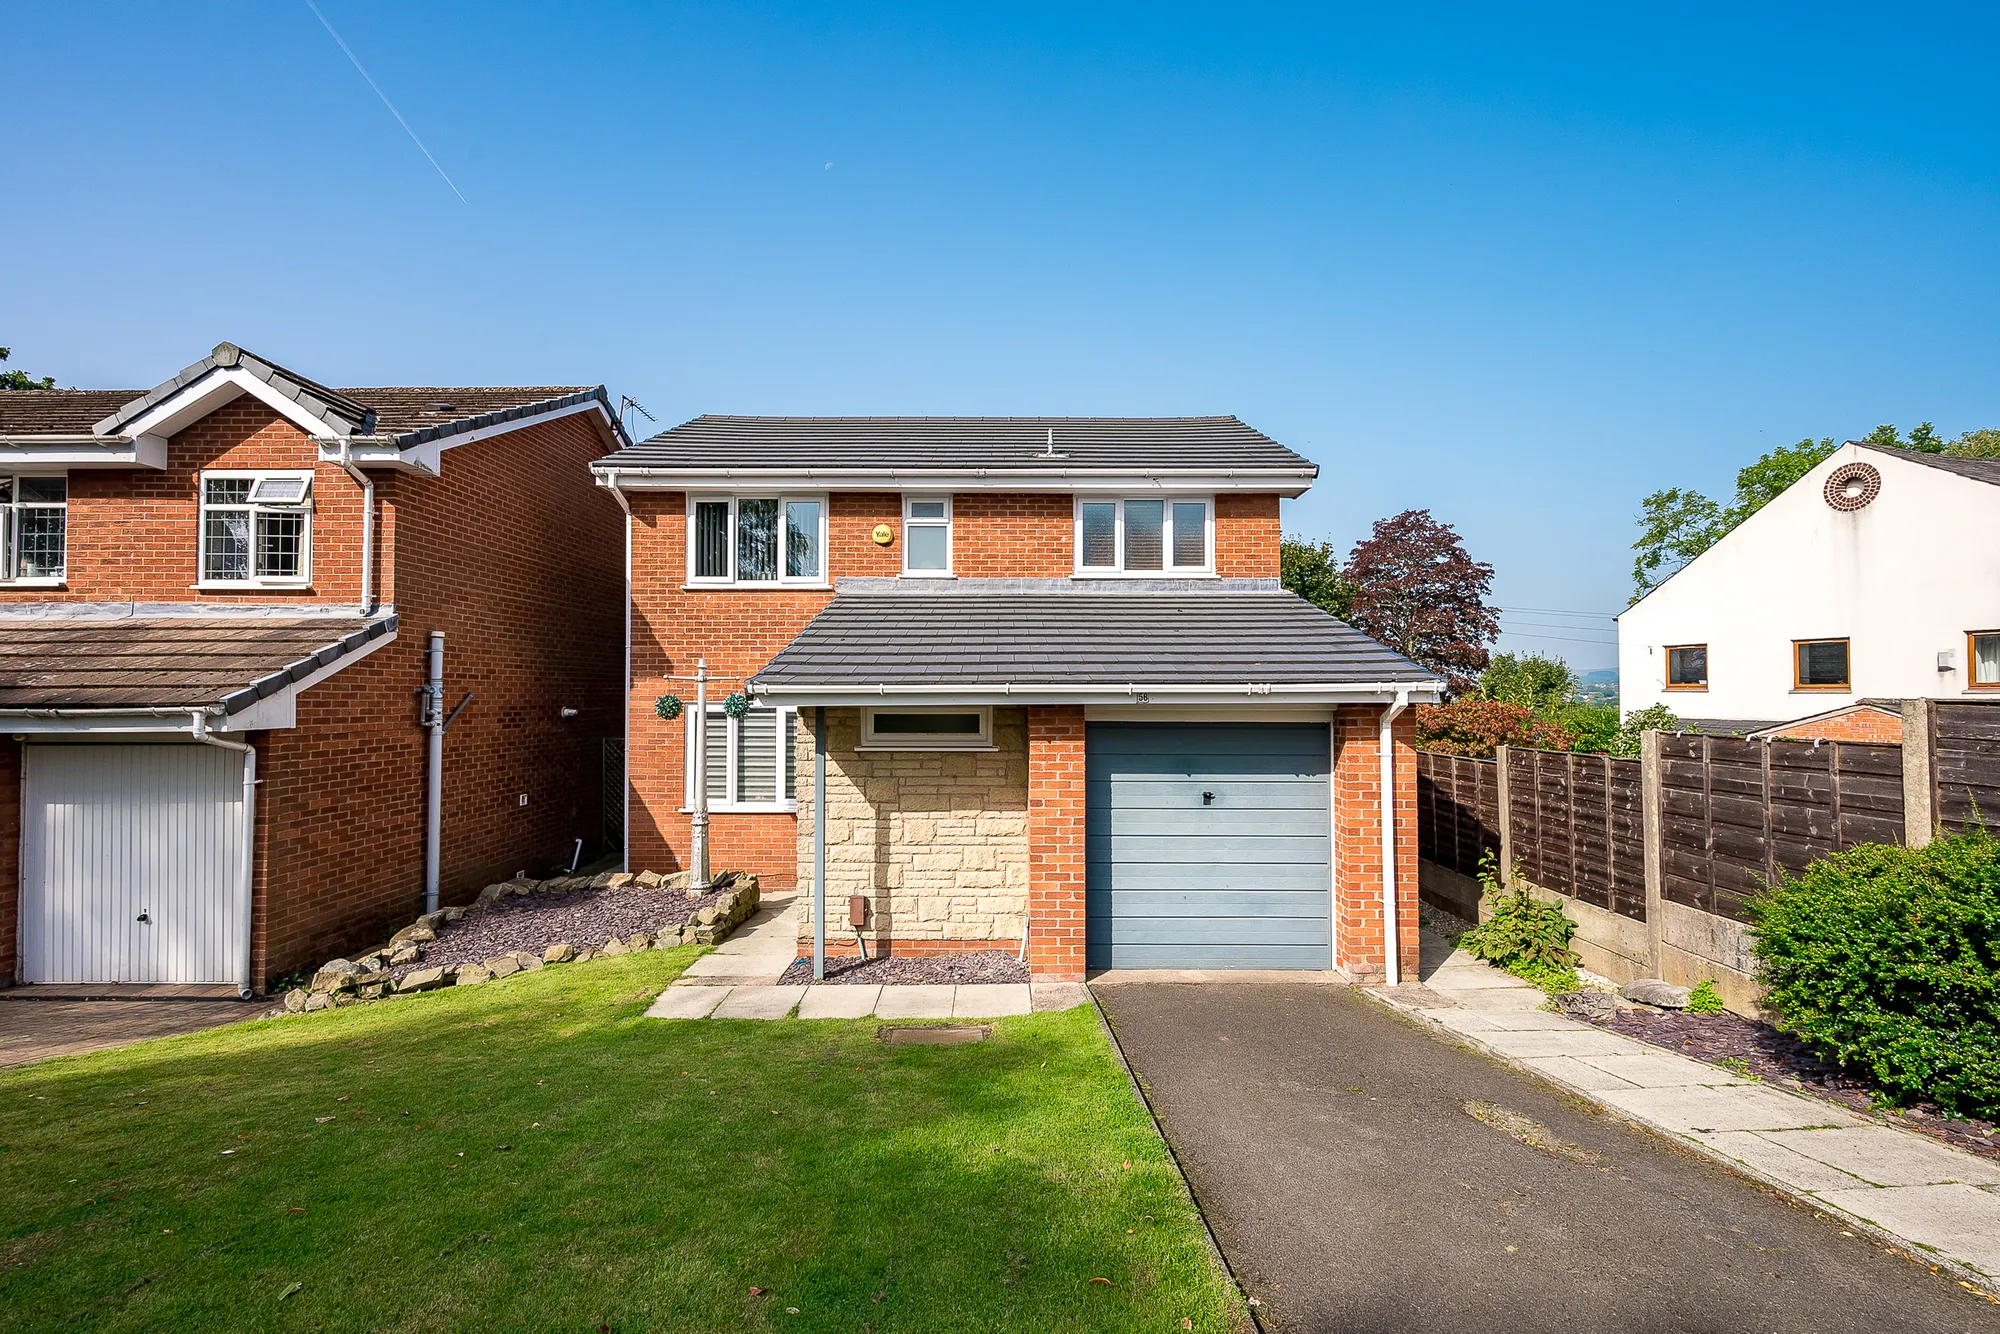 4 bed detached house for sale in Appledore Drive, Bolton - Property Image 1